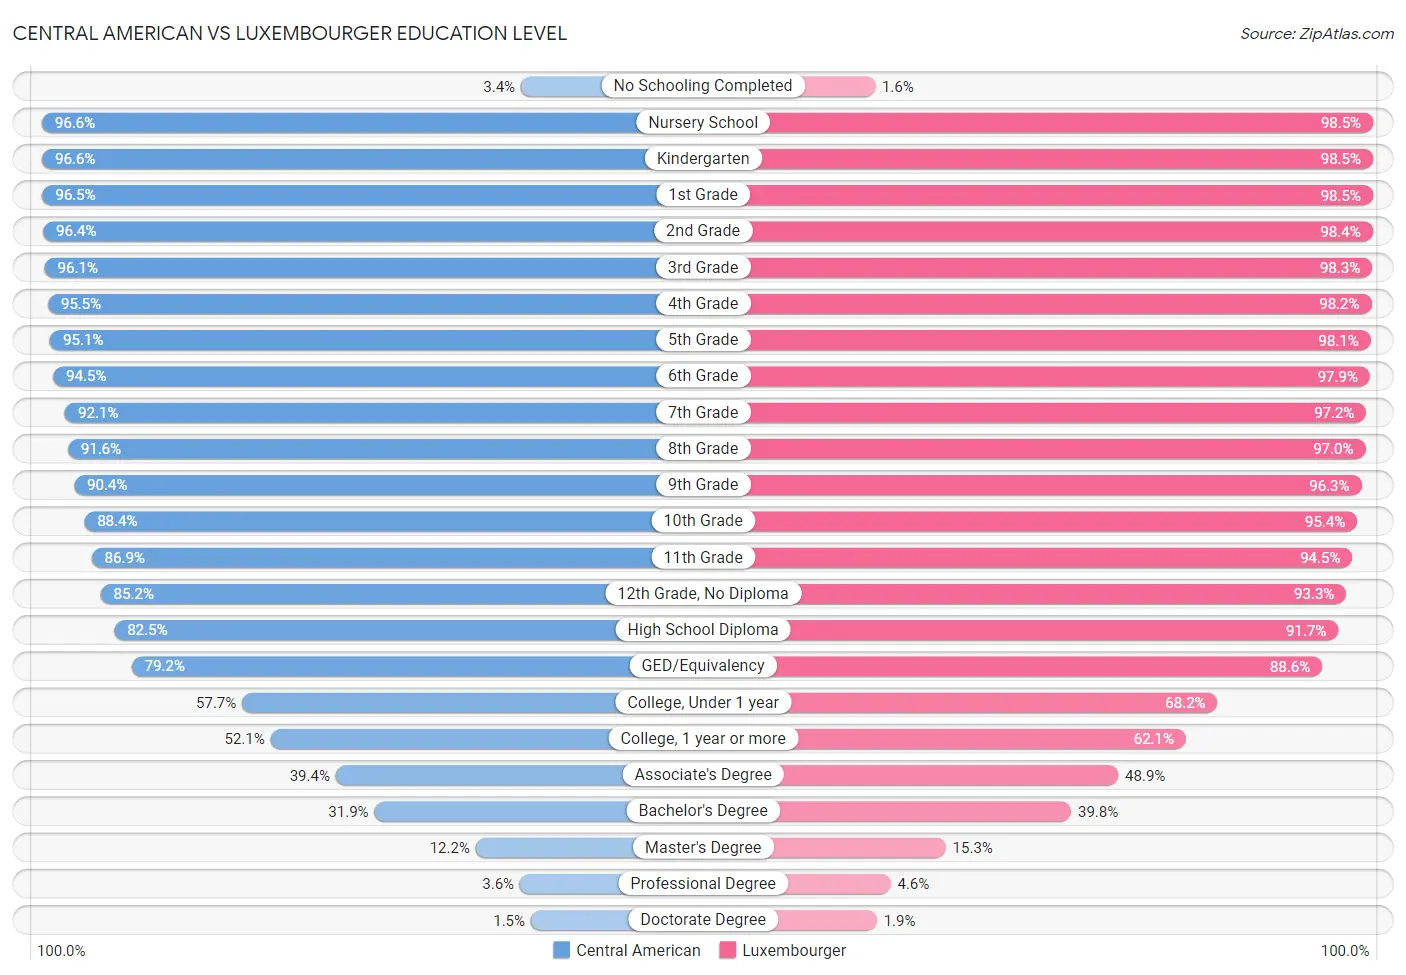 Central American vs Luxembourger Education Level